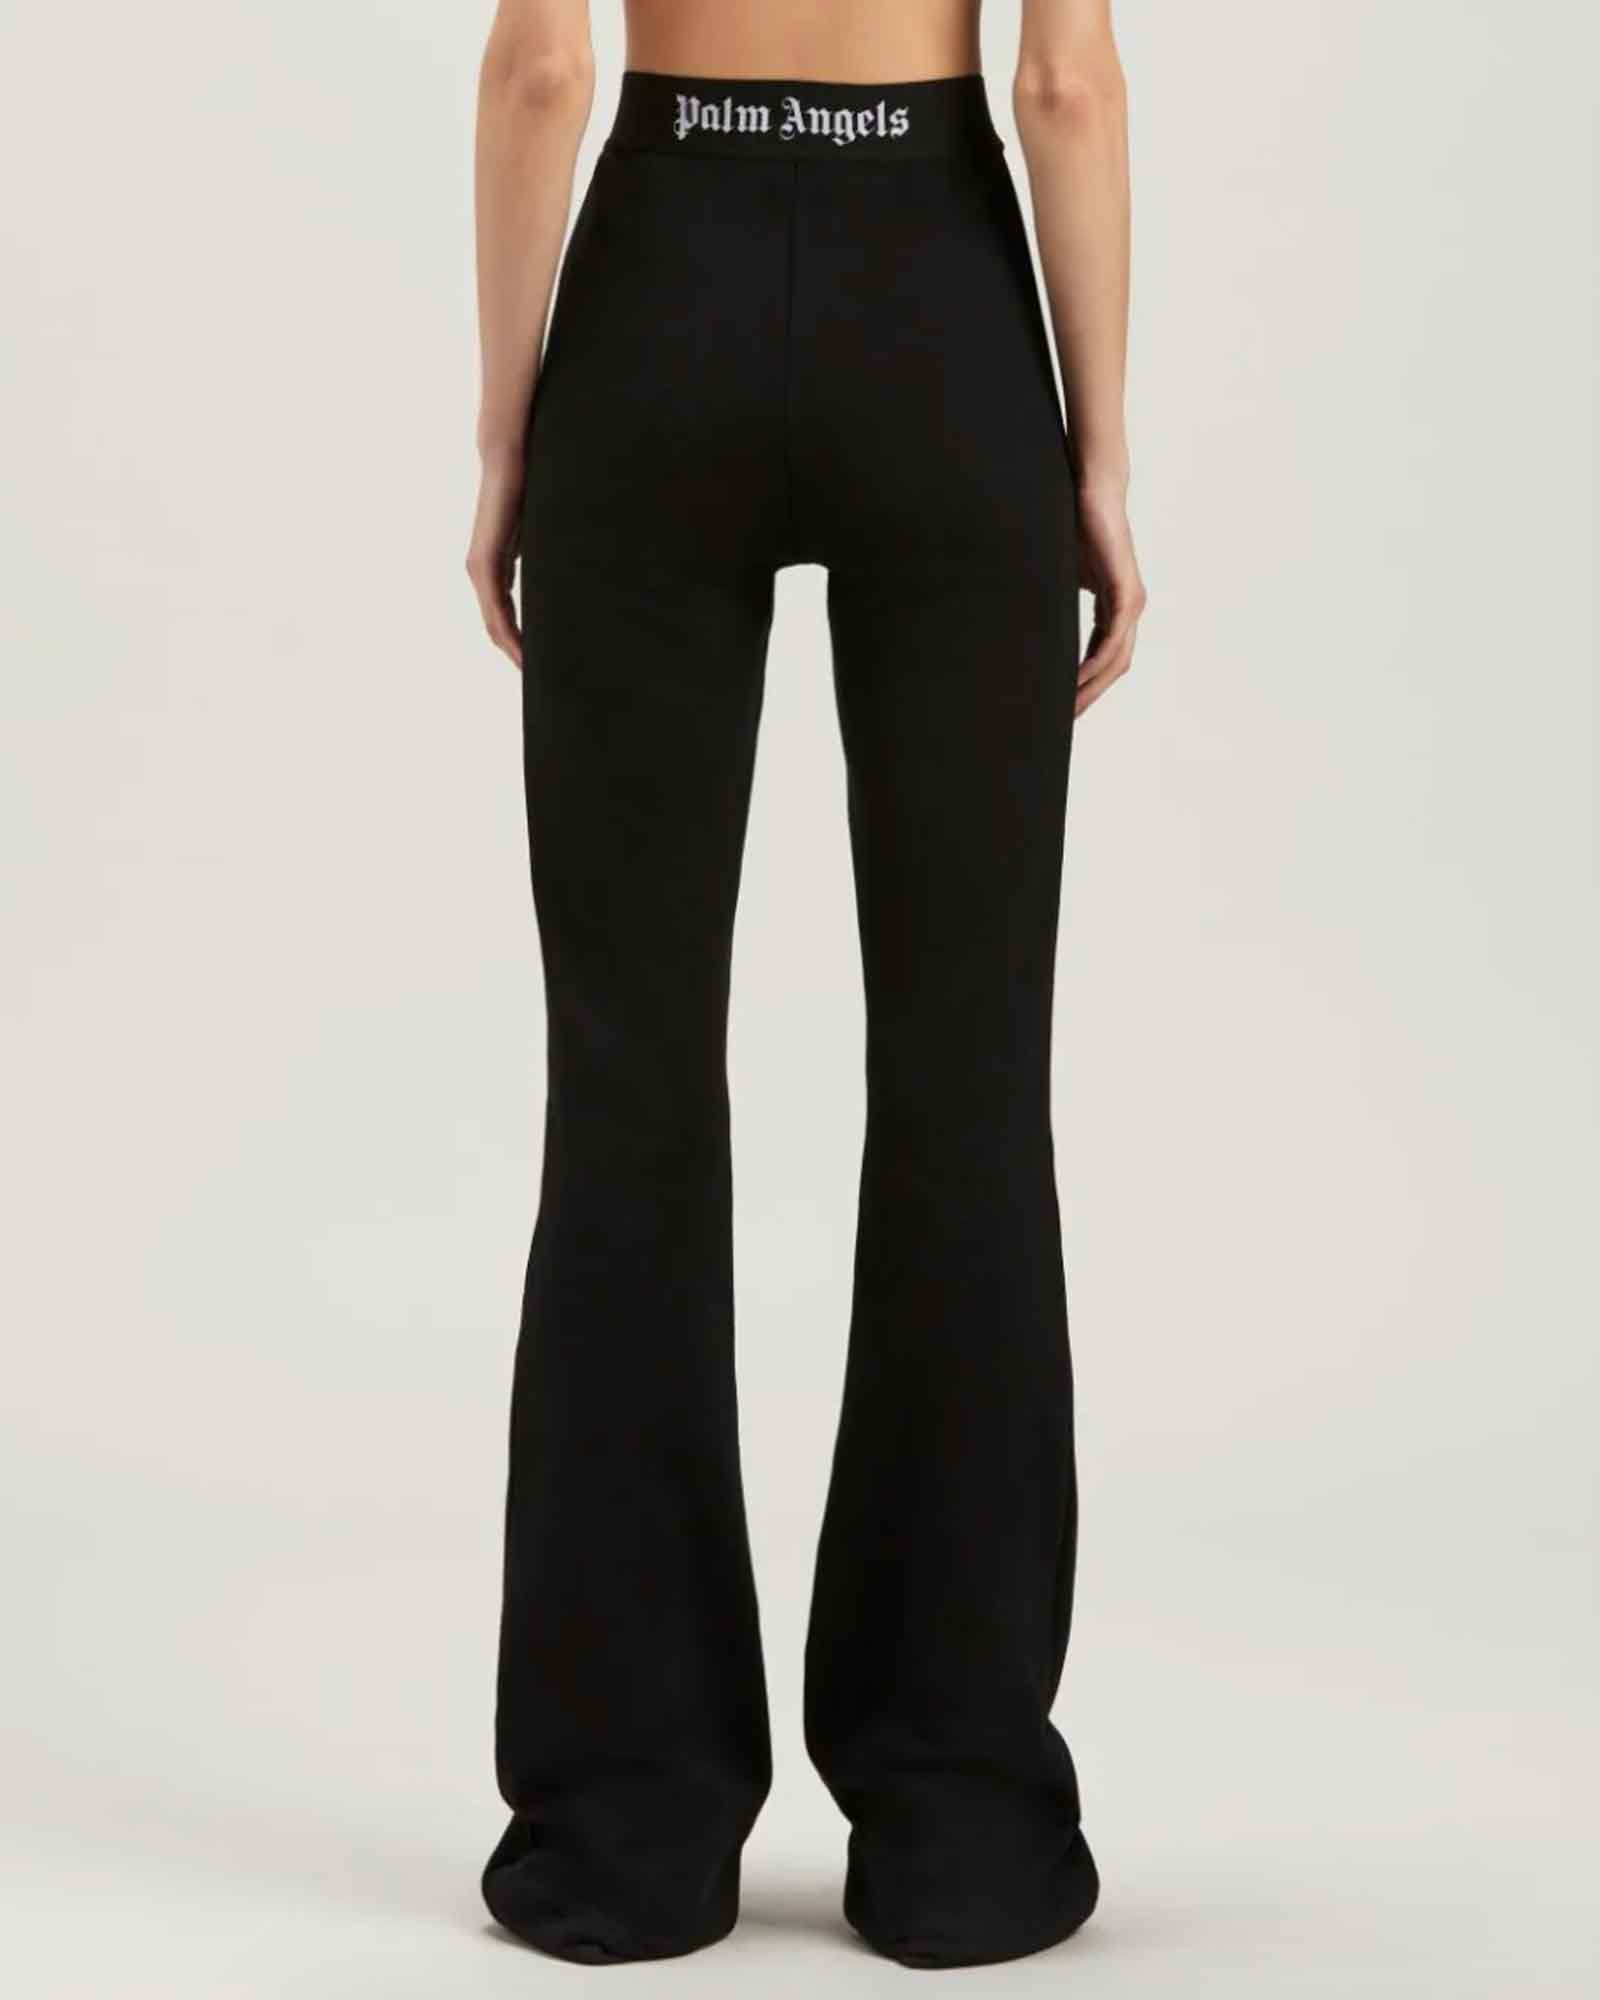 Palm Angels logo-tape Cotton Flared Trousers - Farfetch